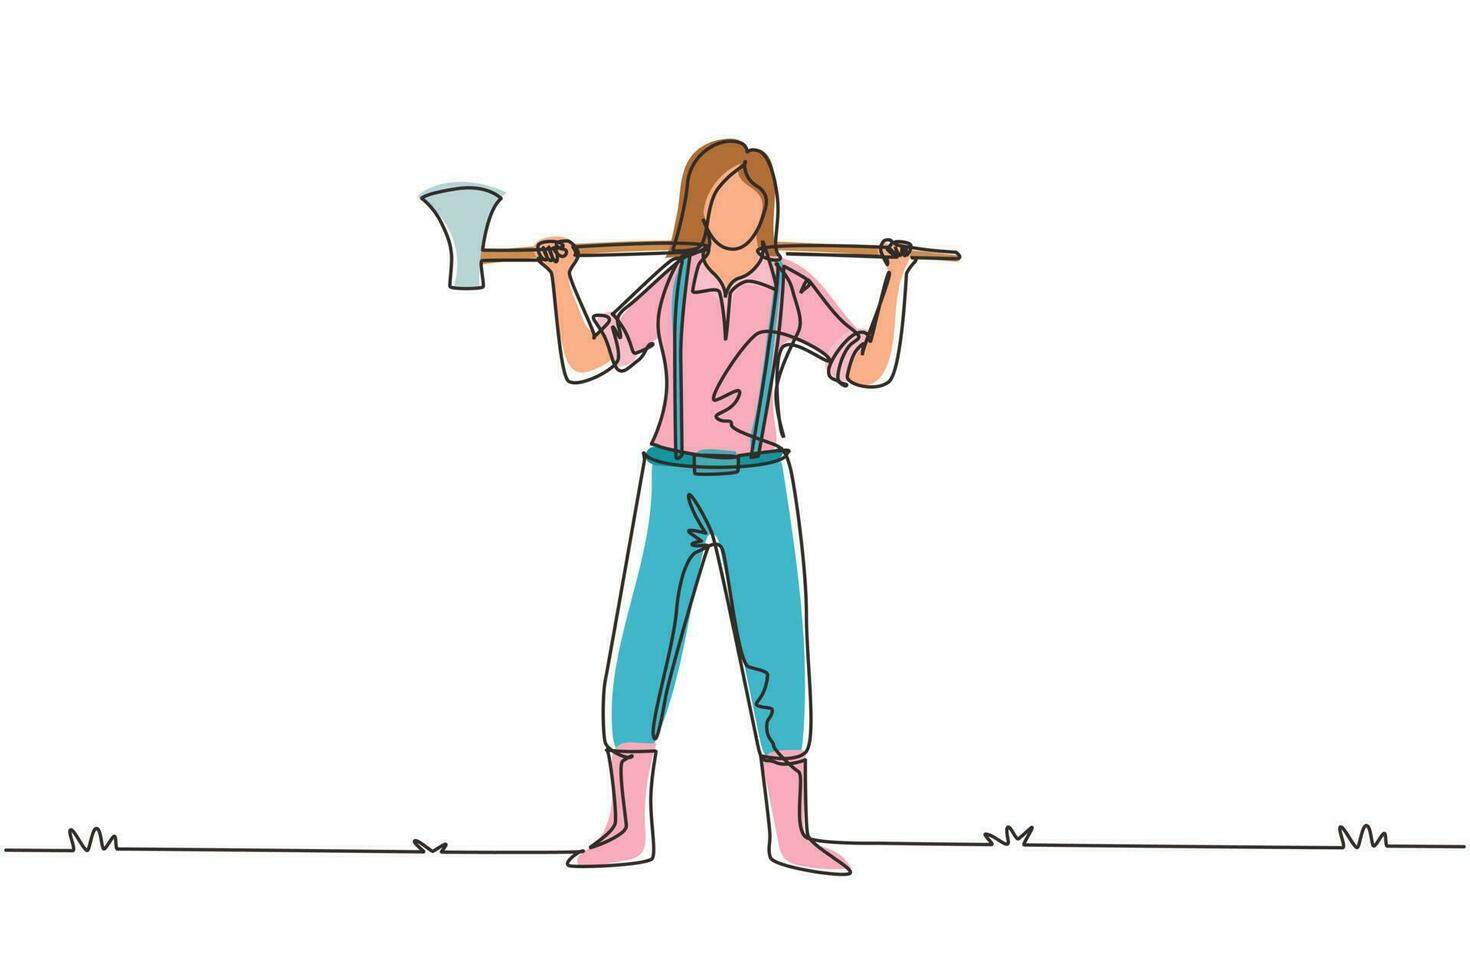 Single continuous line drawing pretty woman lumberjack in plaid shirt, jeans with belt, leather boots holding on her shoulder a ax with long wooden handle. One line draw design vector illustration